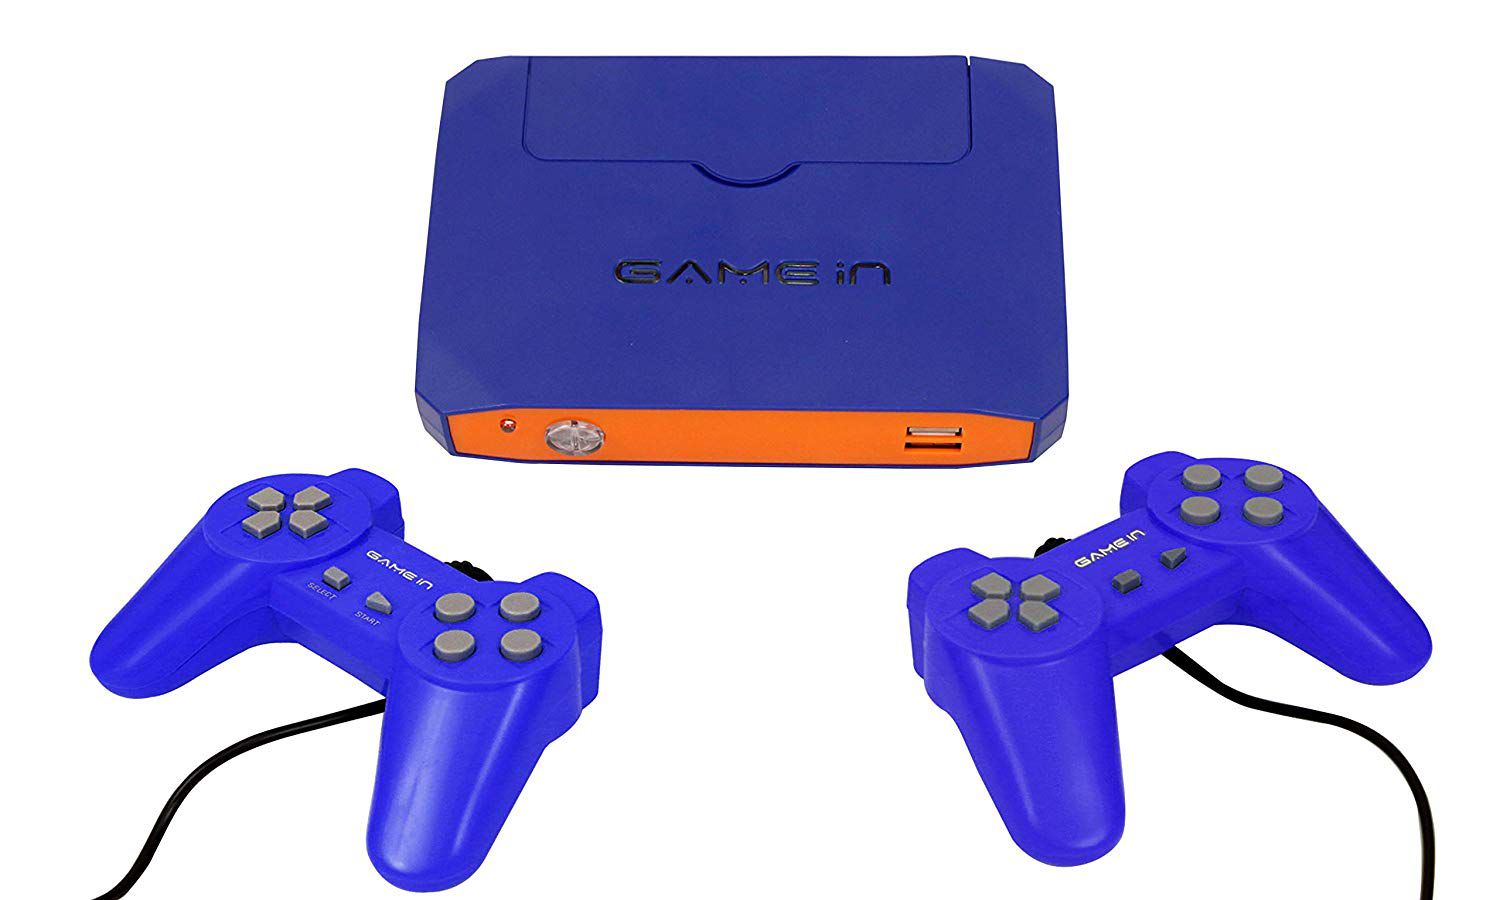     			Mitashi Game In Junior NX Gaming Console With 300 In Bulit Games-Blue